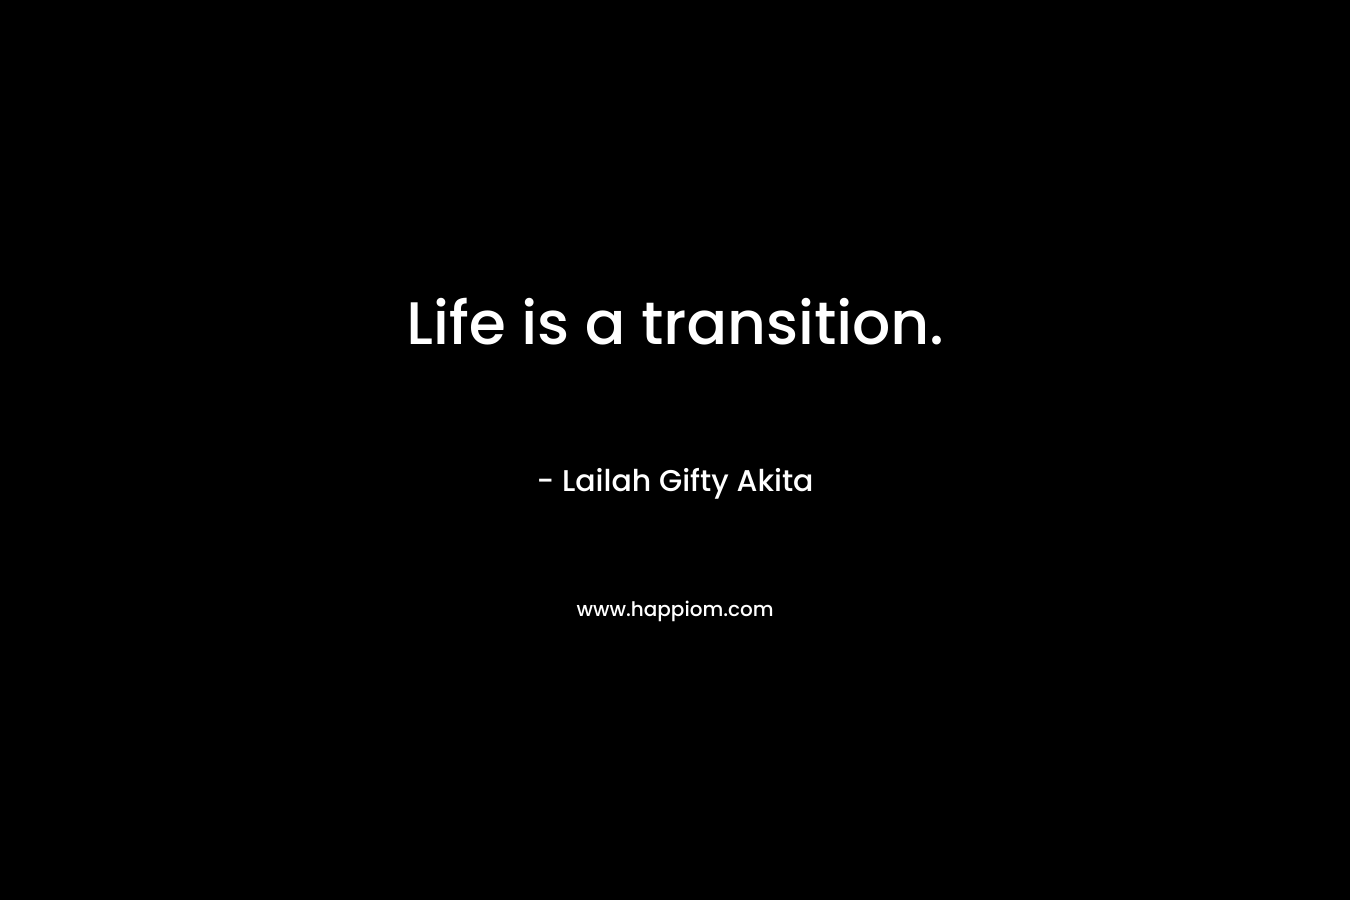 Life is a transition. – Lailah Gifty Akita